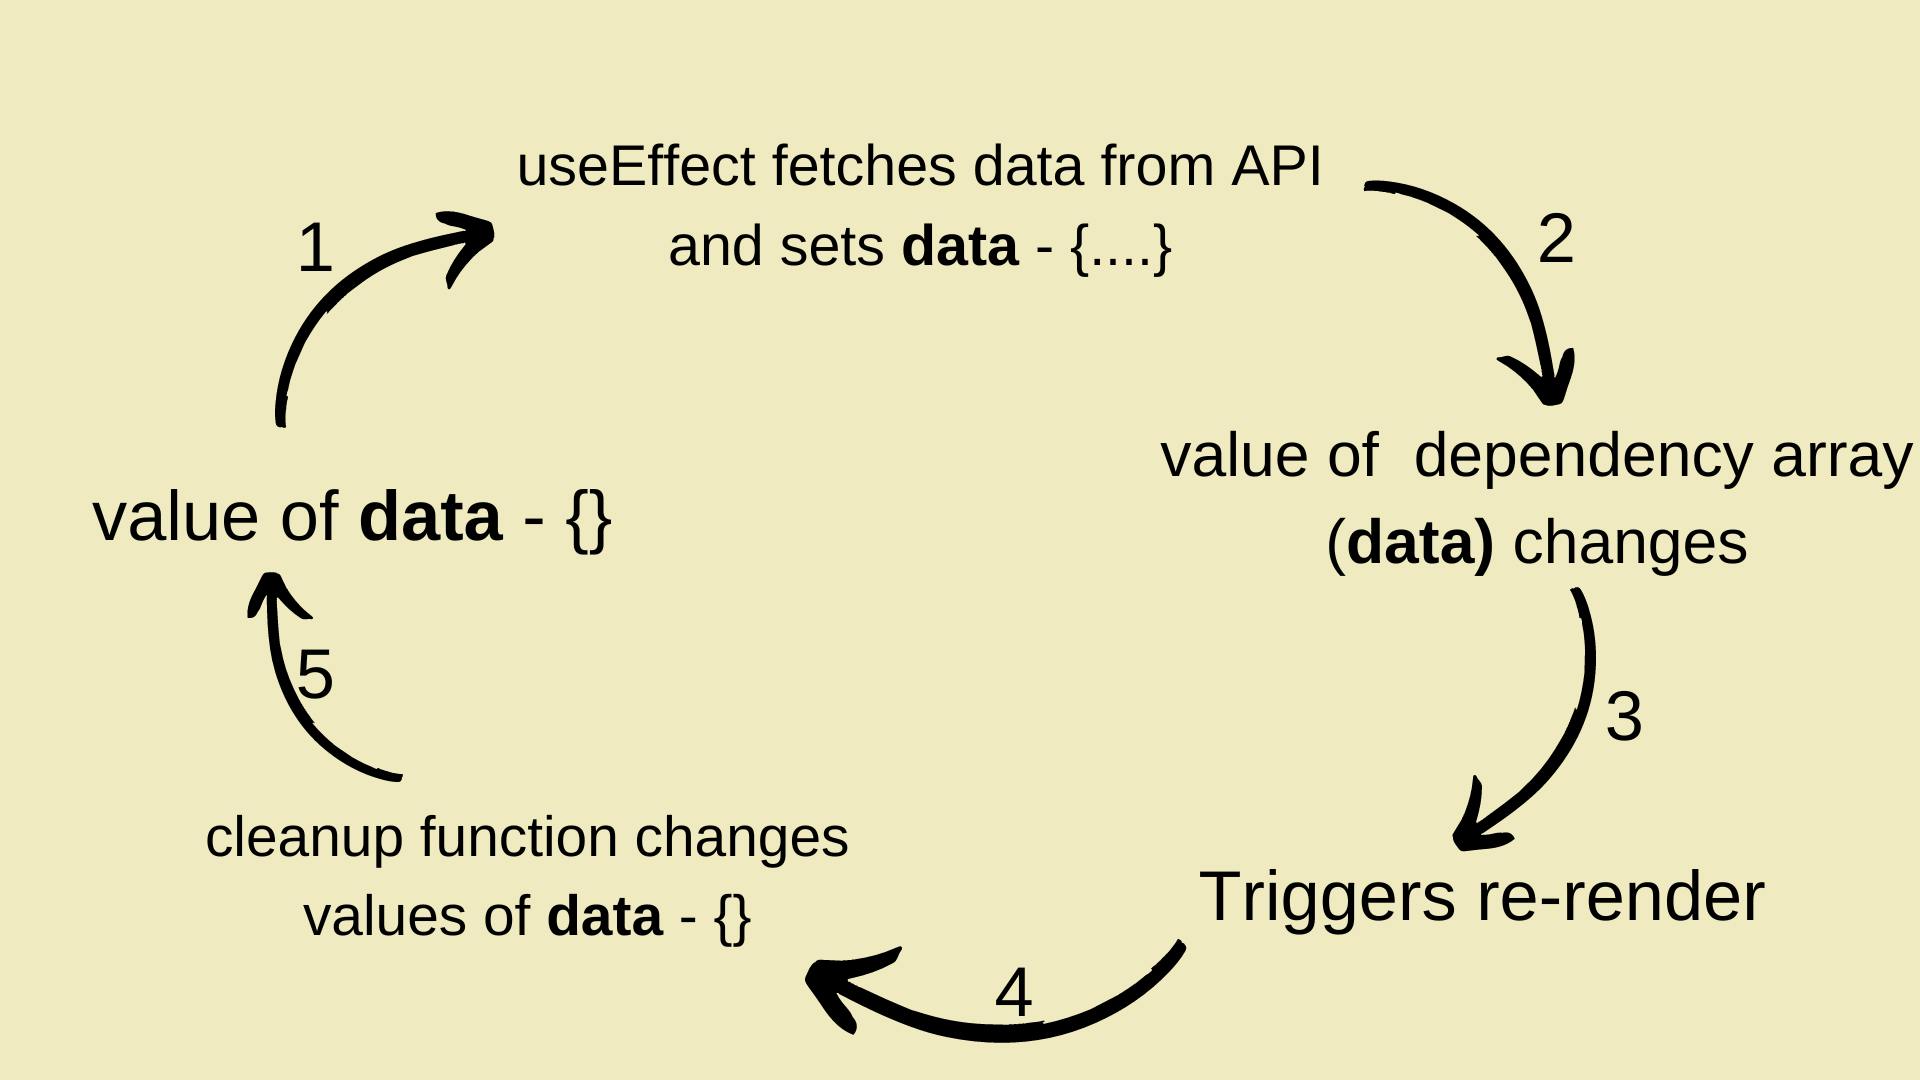 Image shows the infinite loop problem that can be trigger due to changing the dependency value from inside the useEffect.